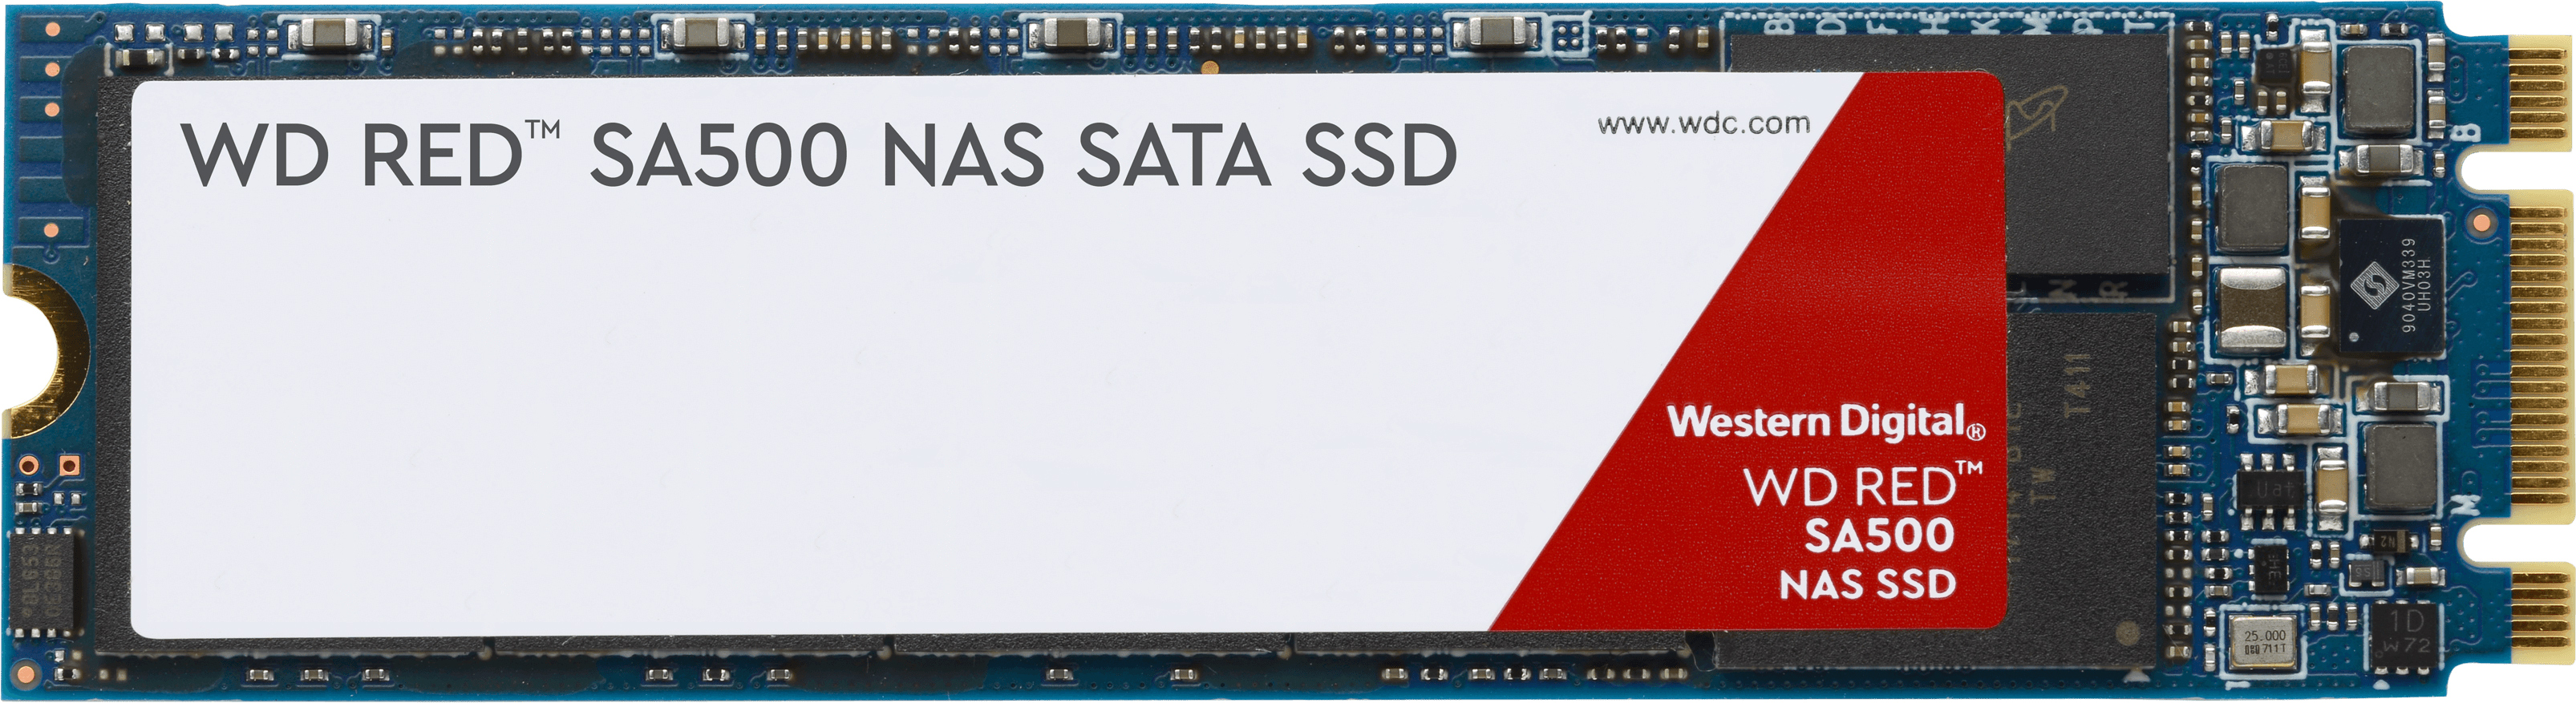 Dare Snack Standard Western Digital Launches WD Red SA500 Caching SSDs for NAS